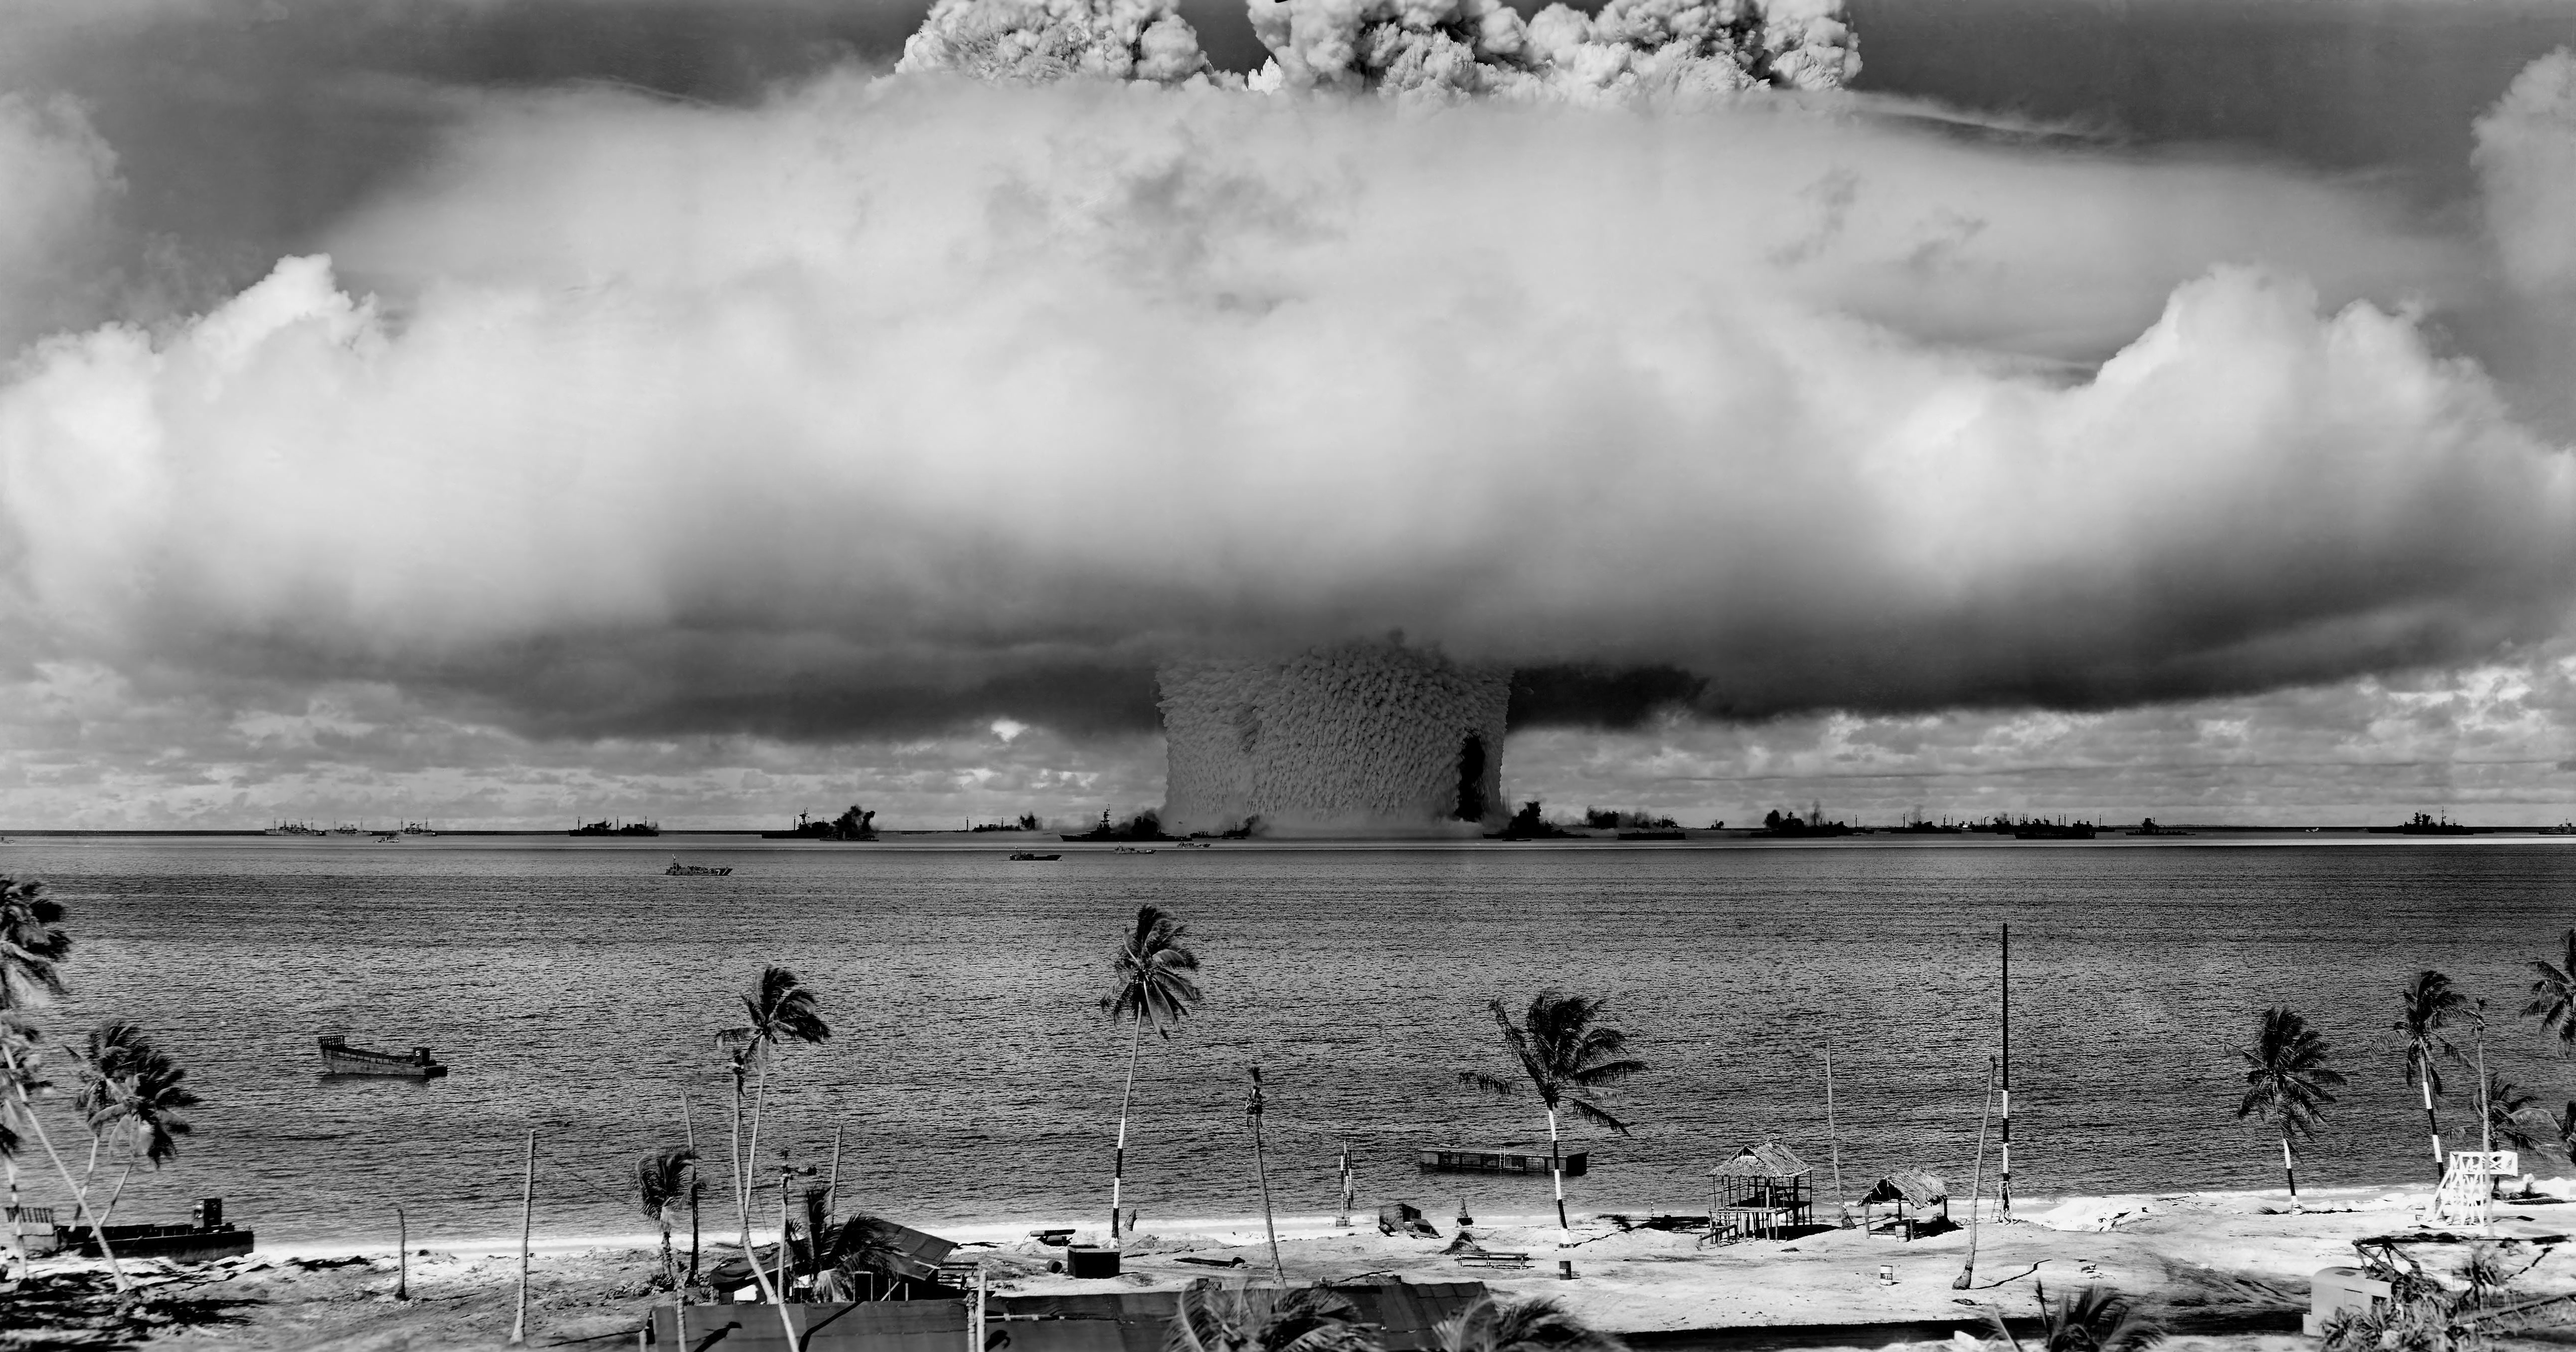 Nuclear Weapons Testing Cleanup